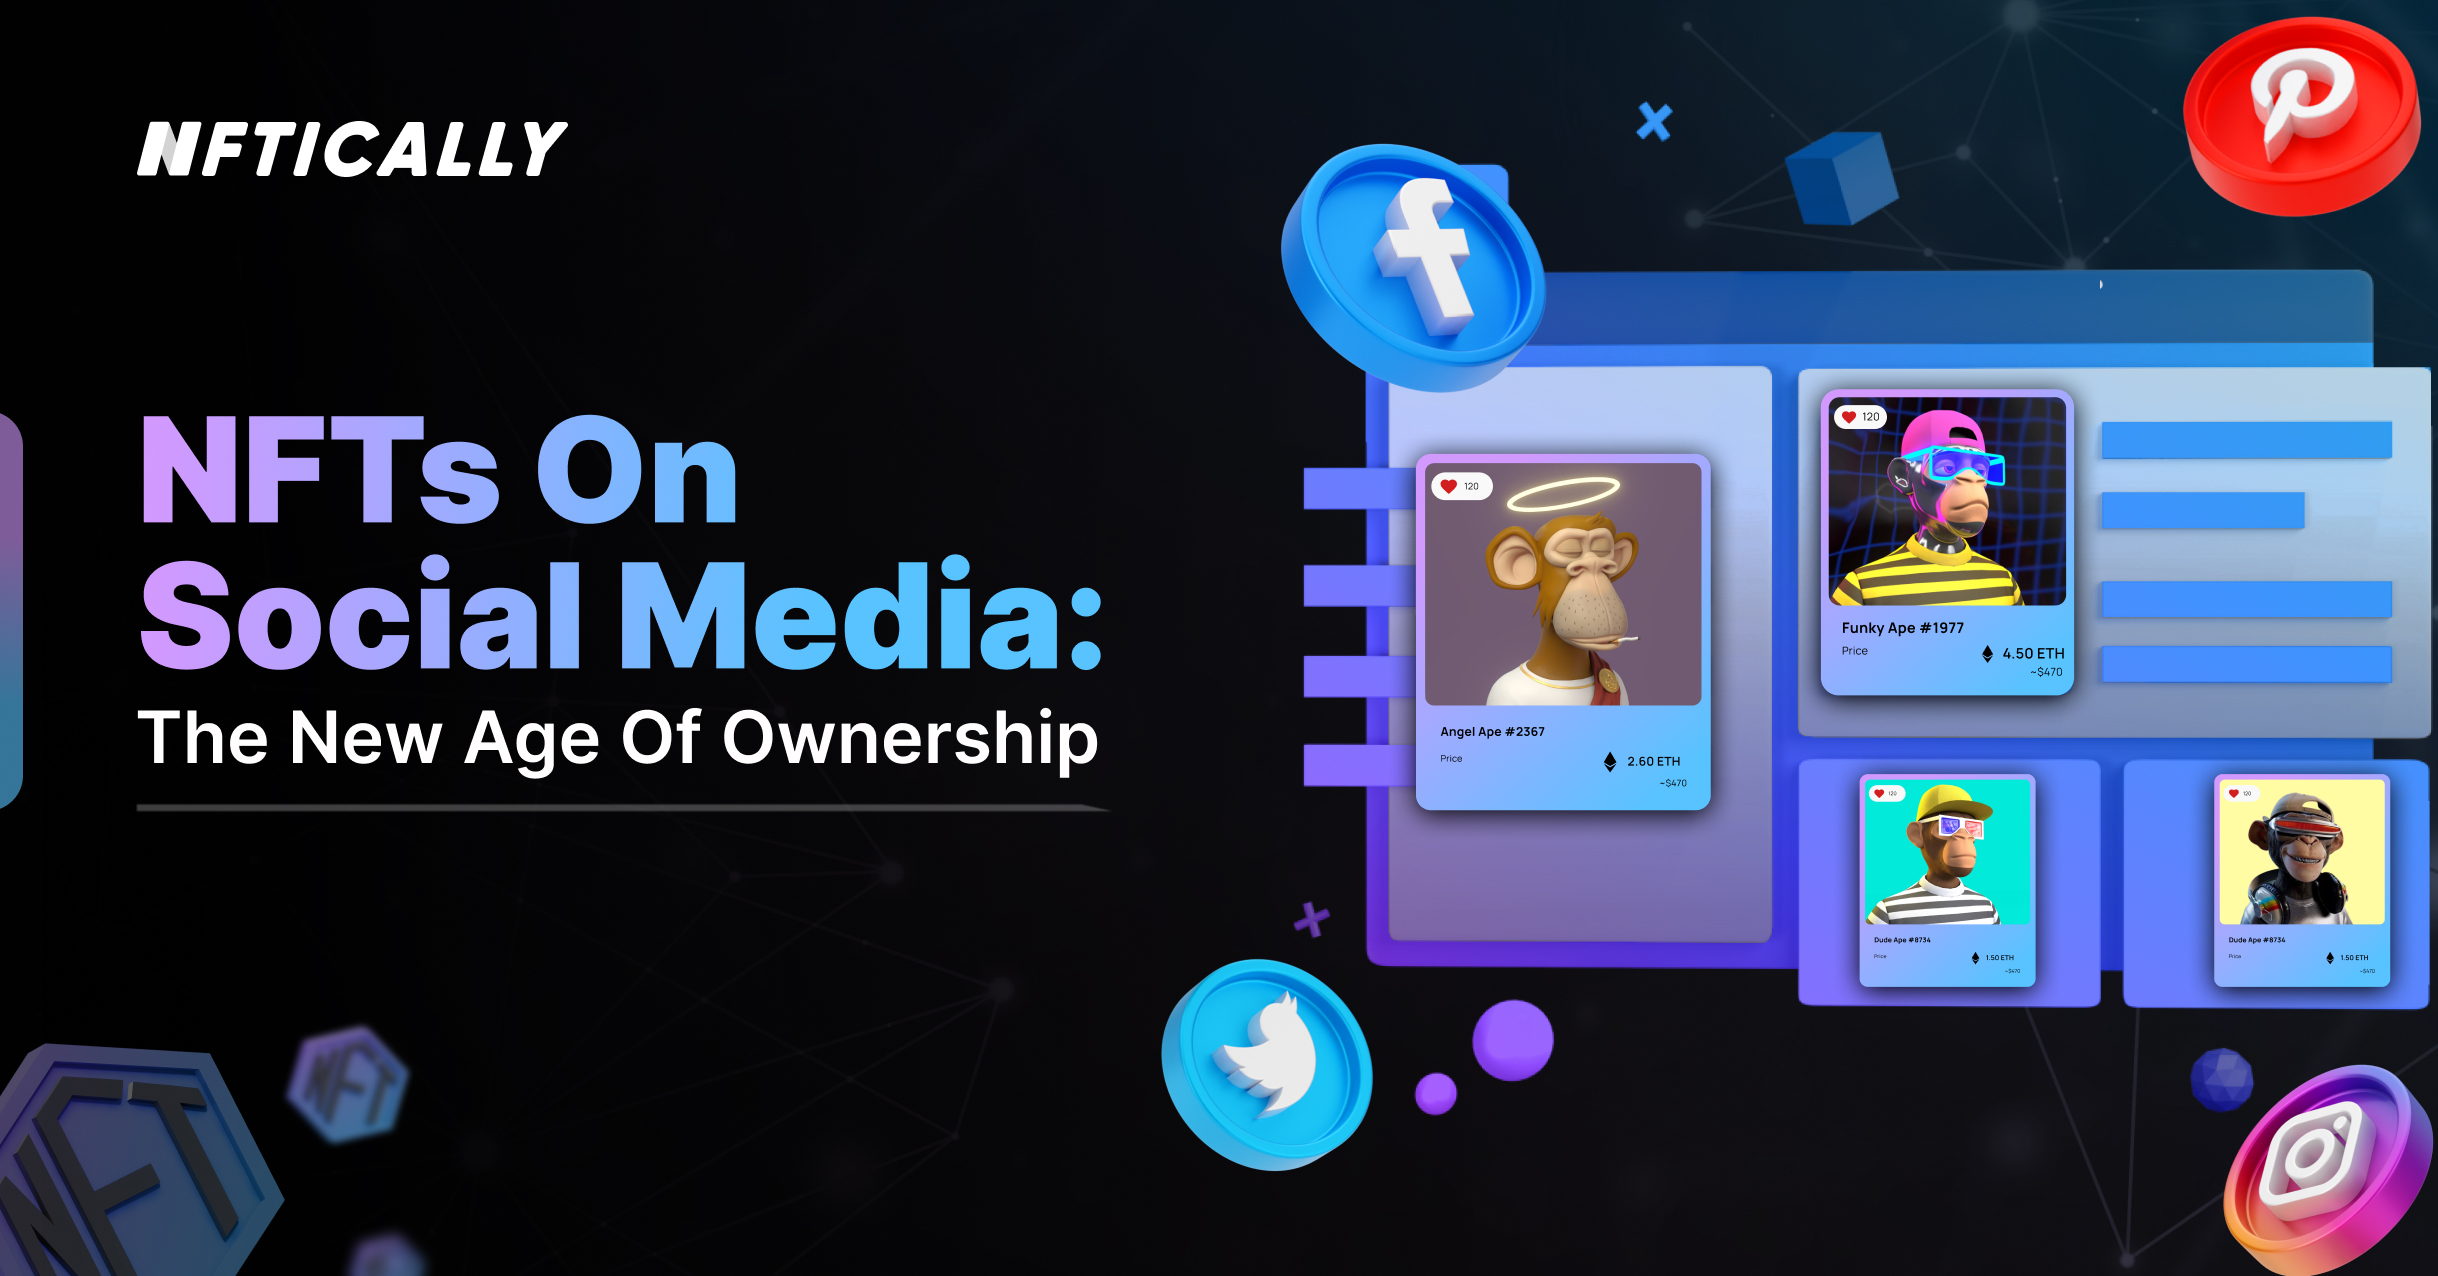 NFTs on Social Media: The new age of ownership